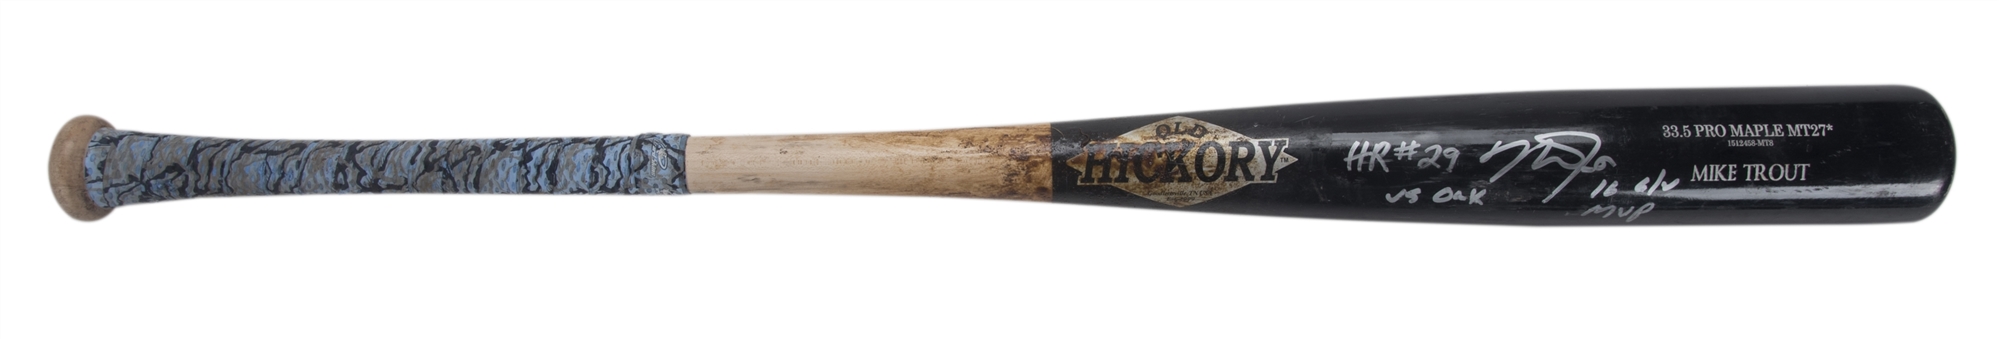 2016 Mike Trout MVP Season Game Used & Signed Old Hickory MT27* Model Bat Photo Matched To 9/26/16 For Career Home Run #168 (Anderson LOA & PSA/DNA GU 10)